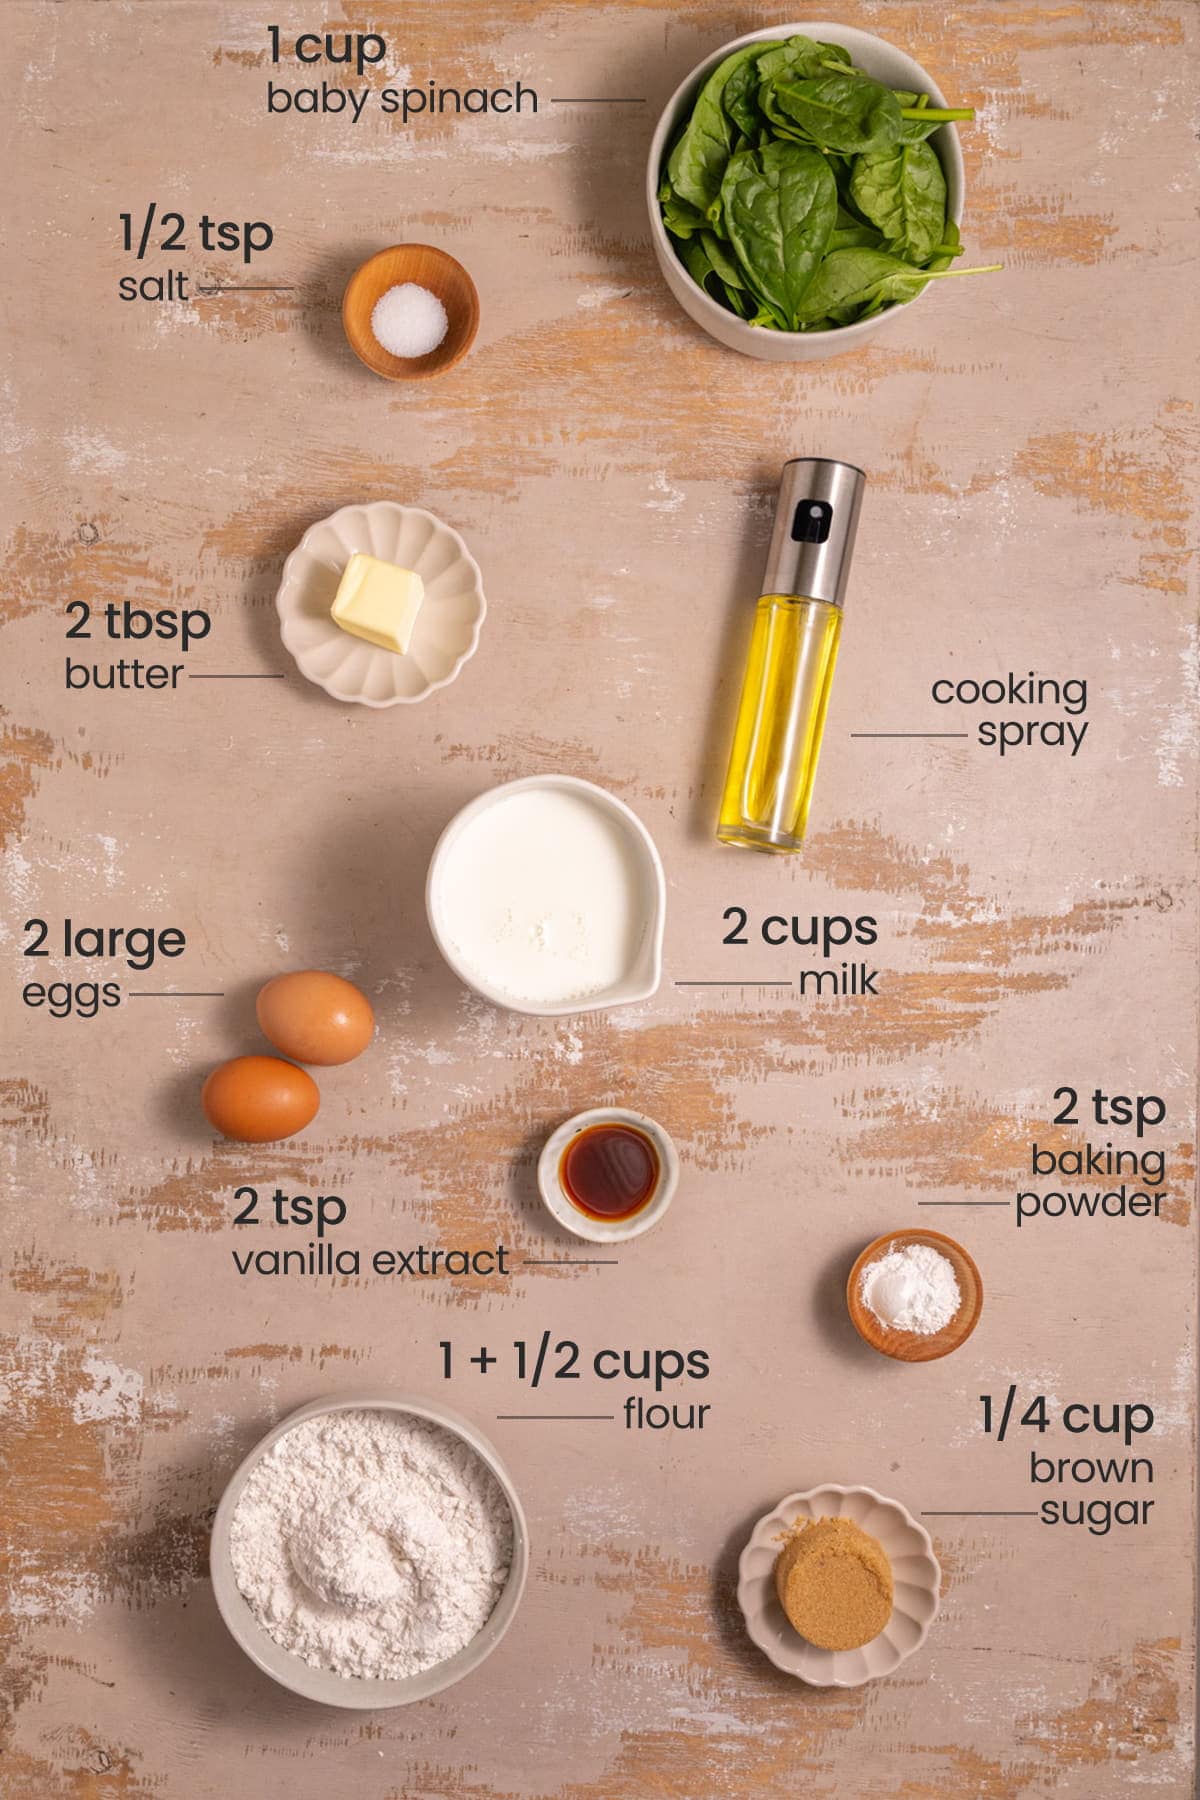 all ingredients for Easy Baked Christmas Pancakes - baby spinach, salt, butter, eggs, cooking spray, milk, vanilla extract, flour, brown sugar, baking powder